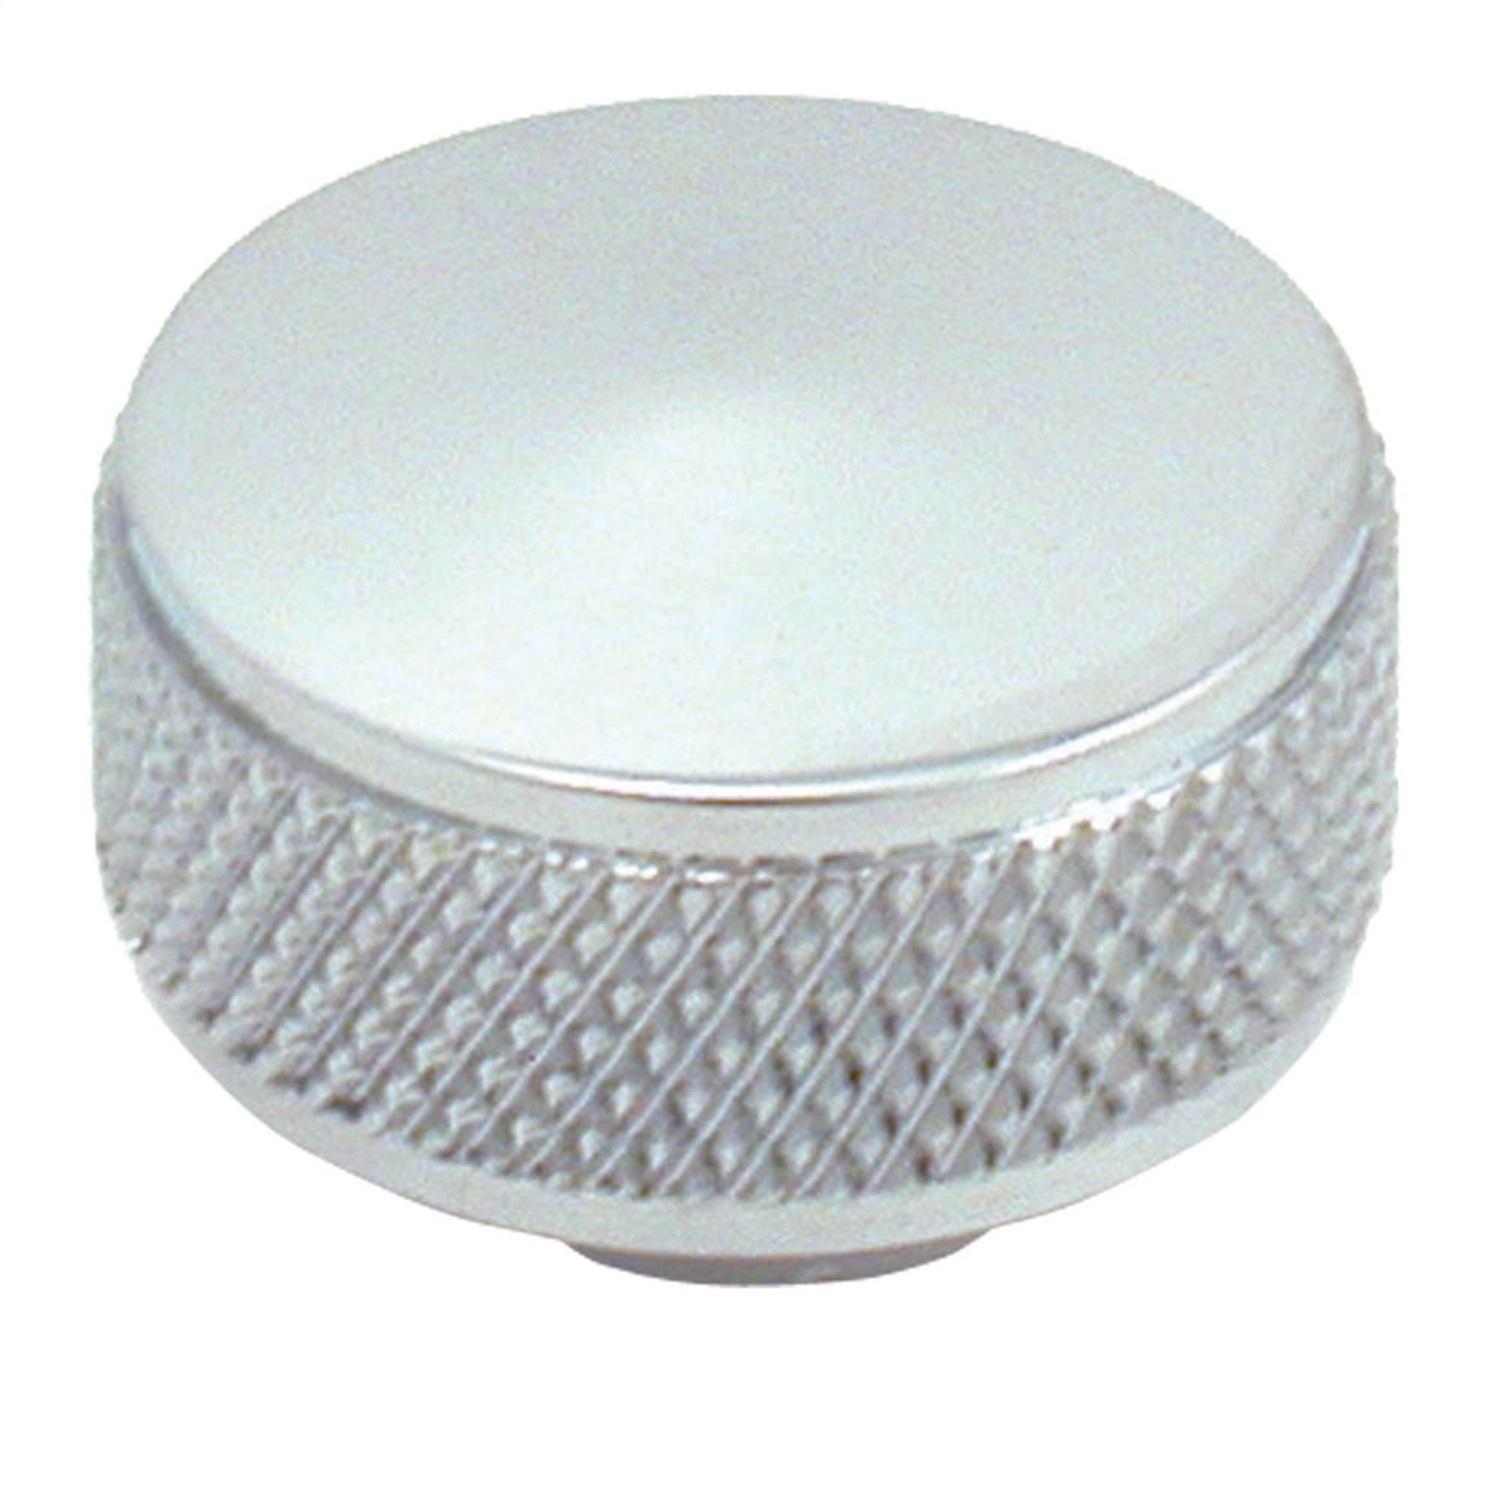 Spectre Performance Spectre Performance 1758 Air Cleaner Nut